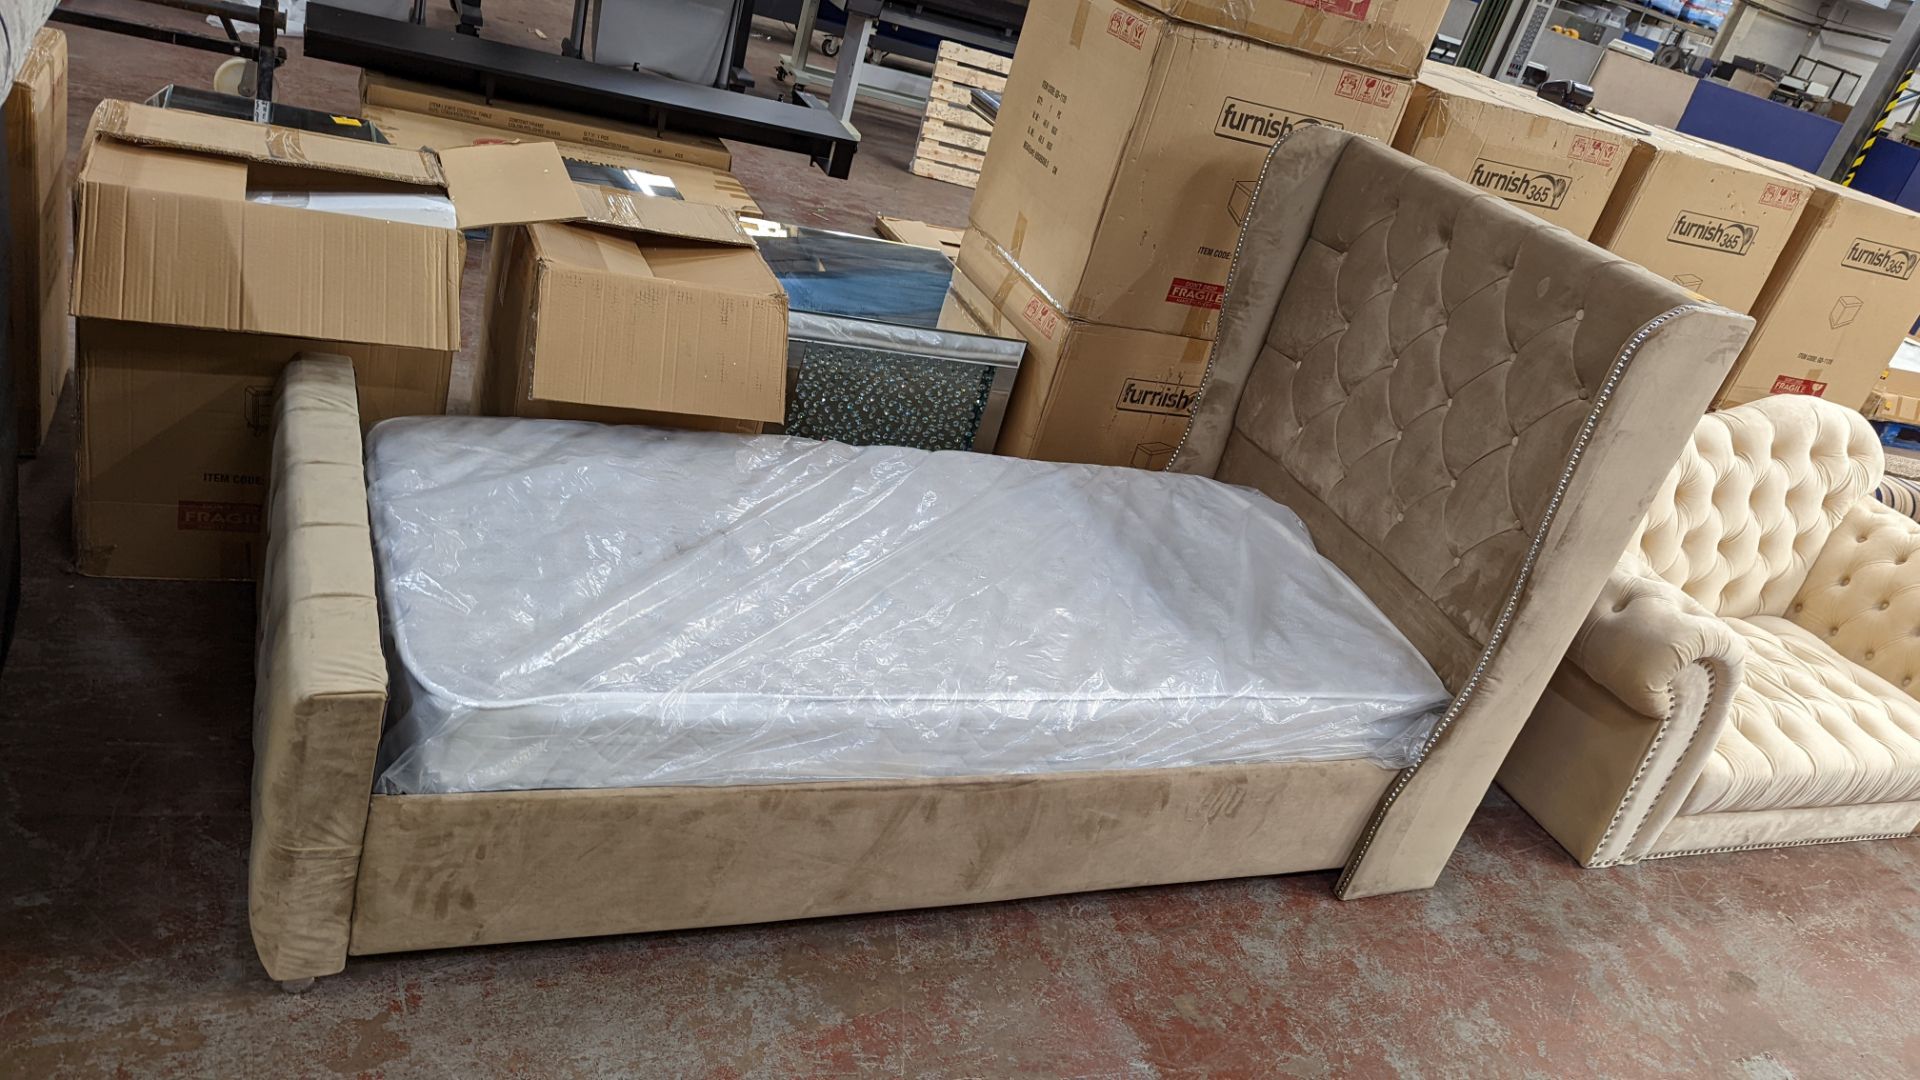 Single bed in suede/suede like fabric including mattress. Mattress dimensions 90cm x 192cm. Bed ma